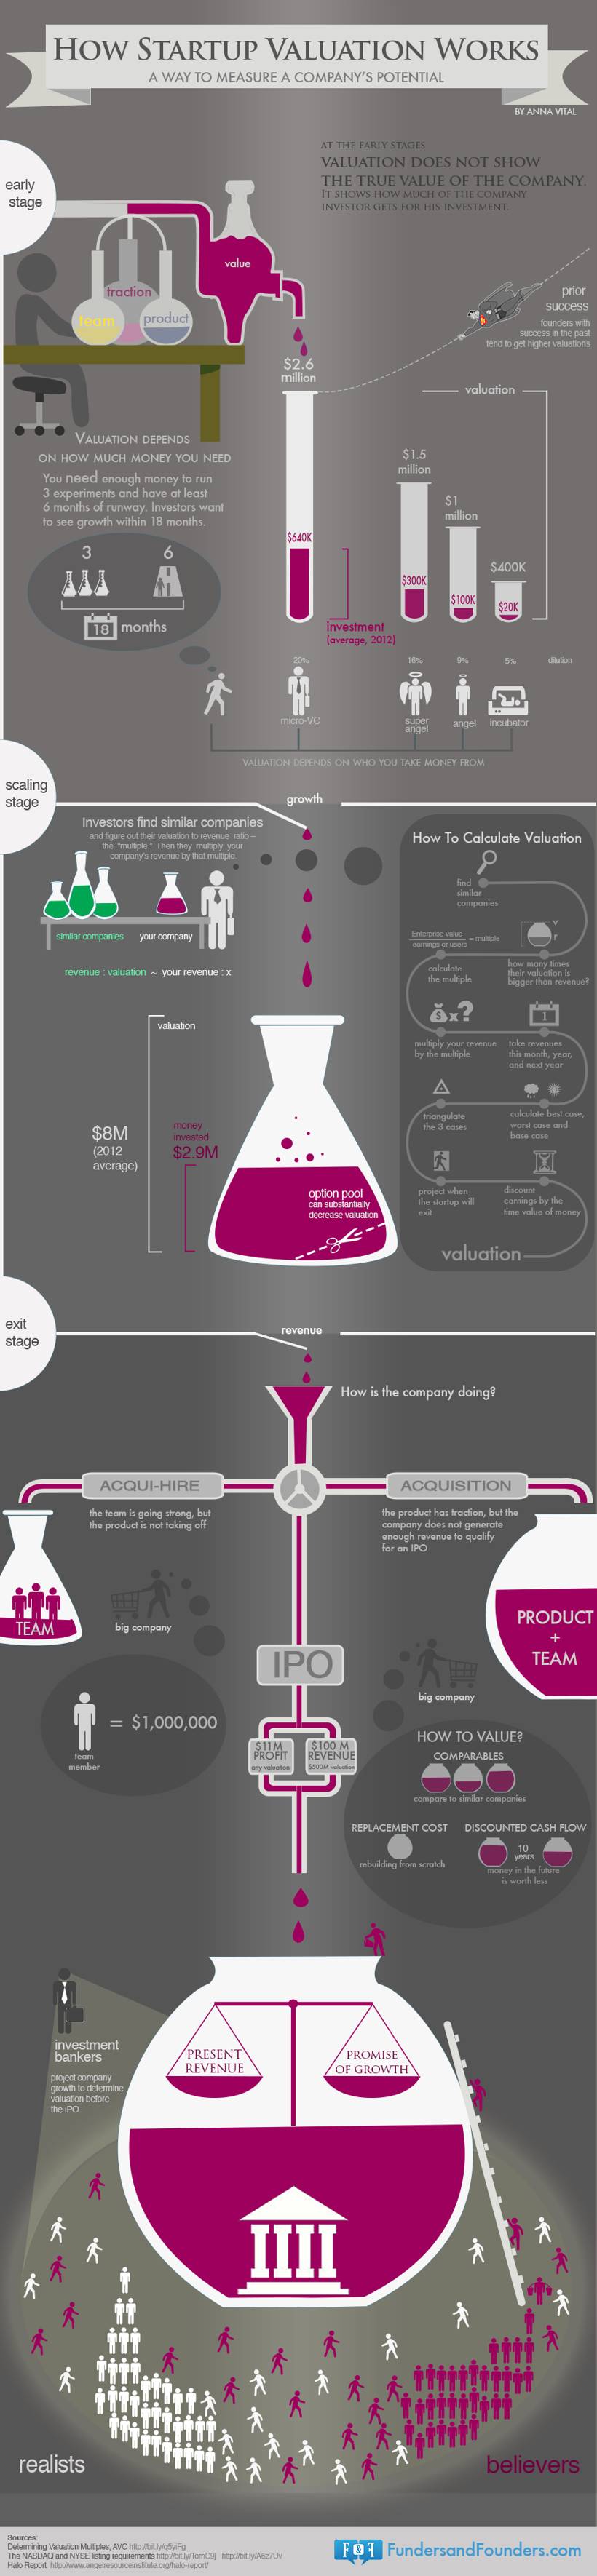 How startup valuation works -infographic